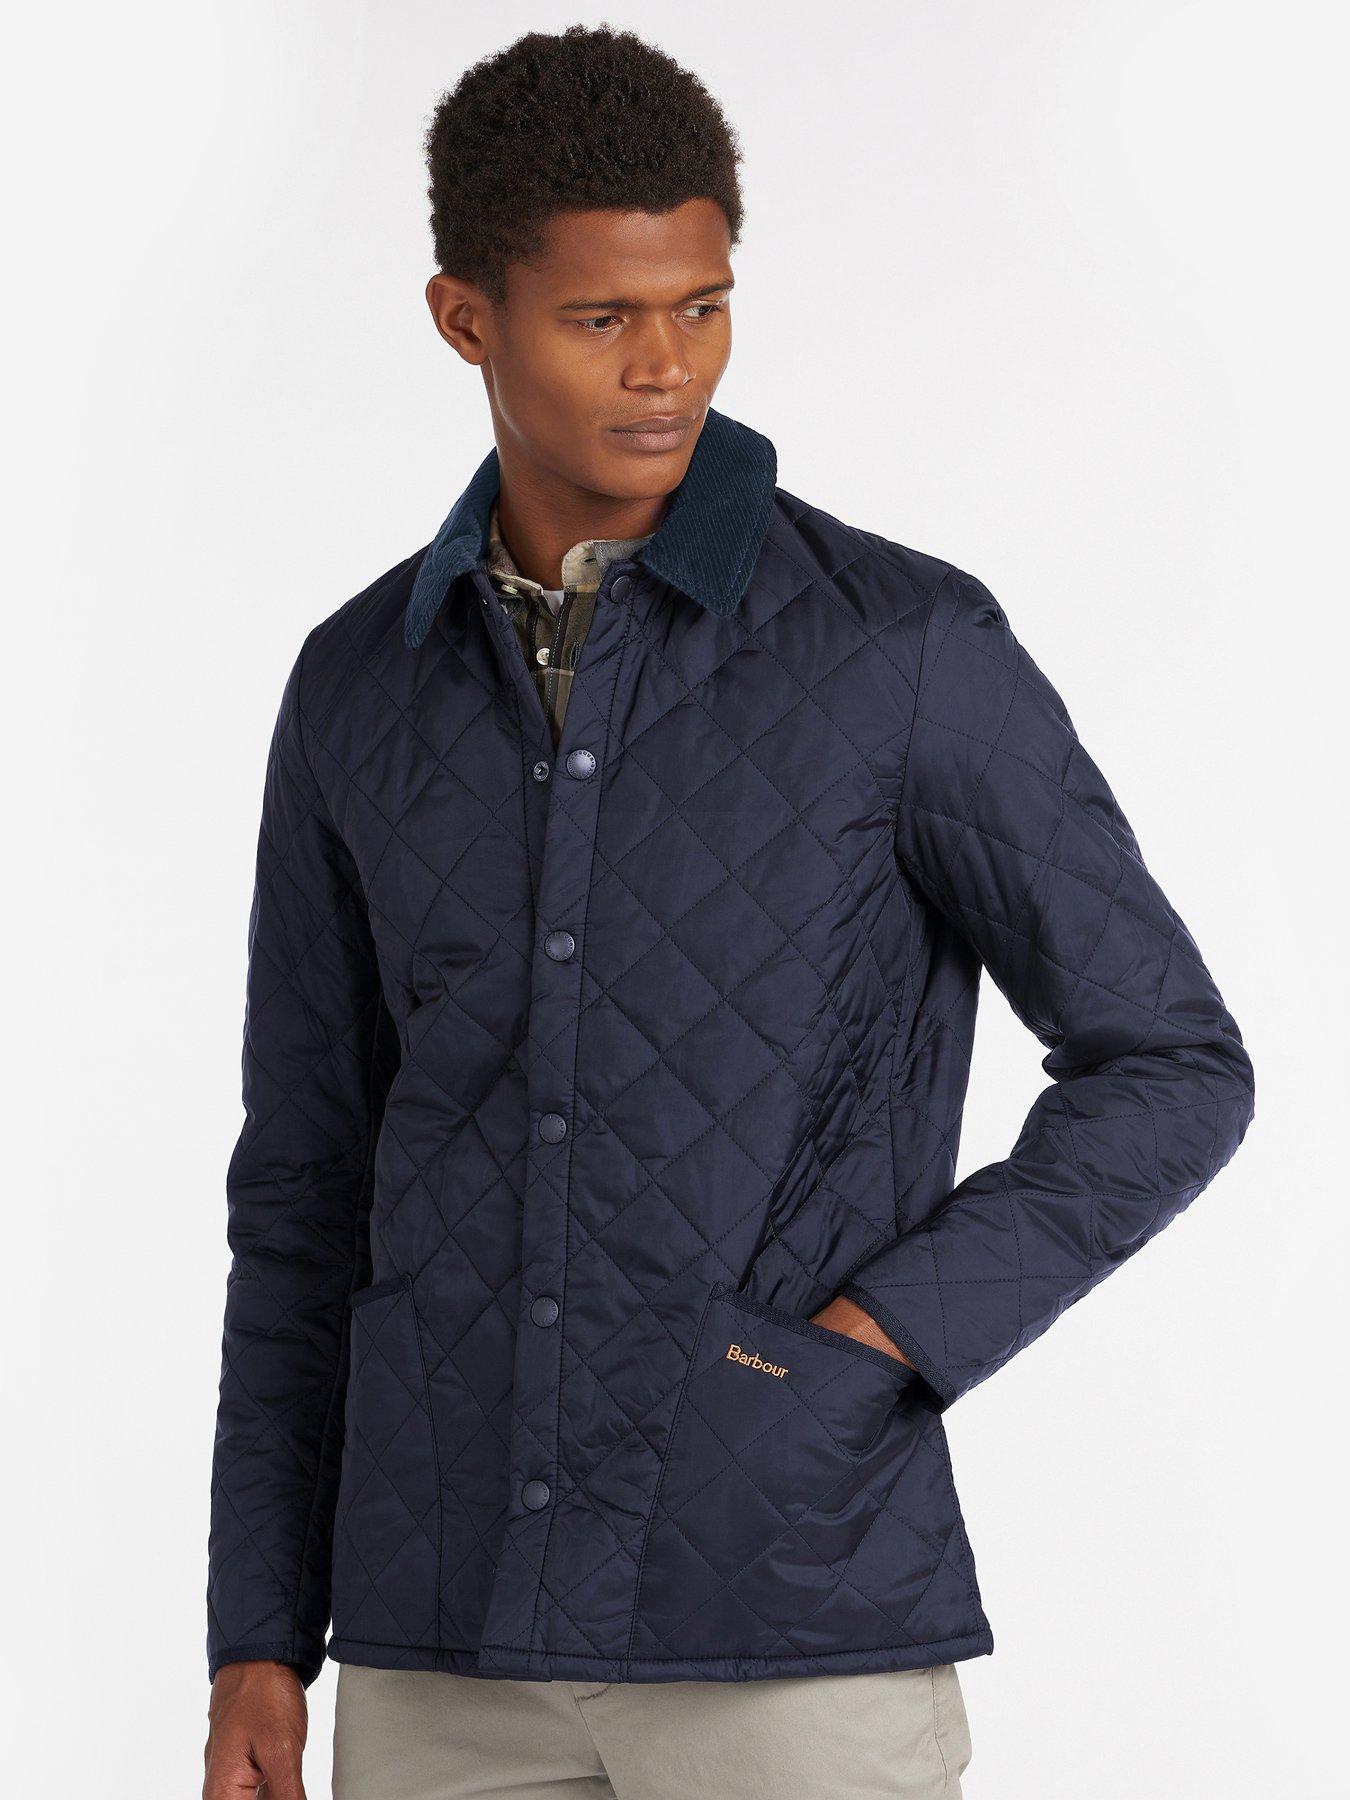 how much is a barbour quilted jacket